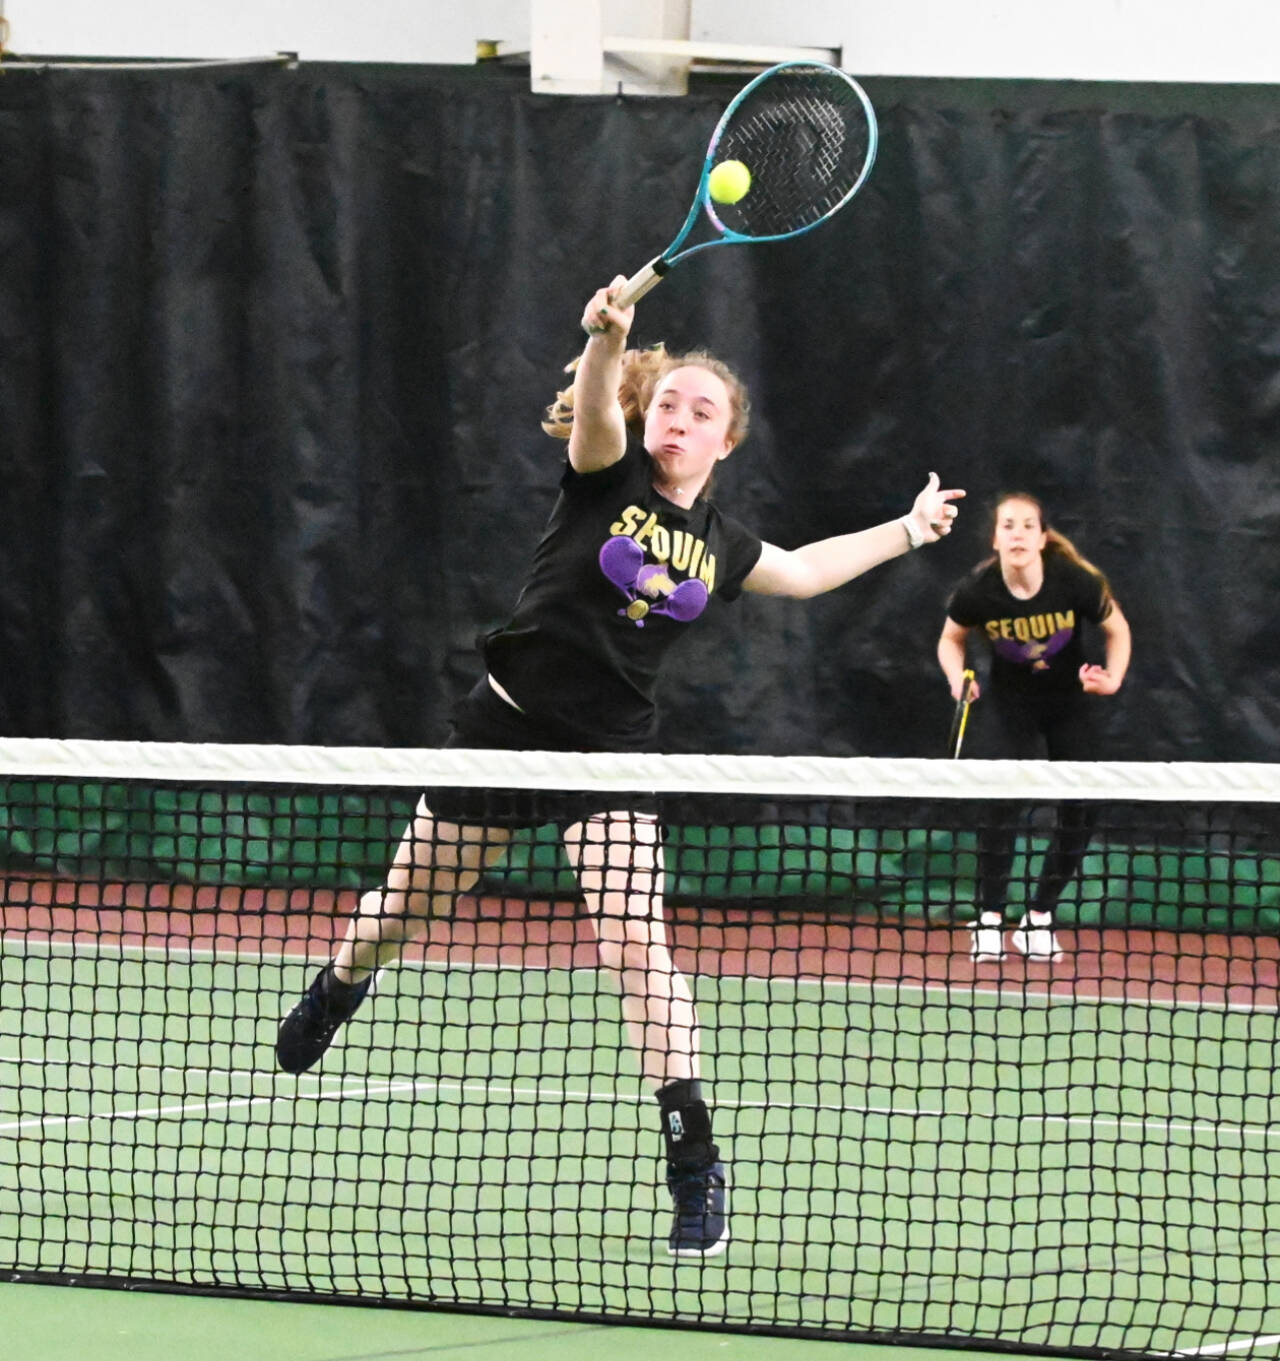 Sequim’s Malory Morey returns a volley with teammate Jordan Hegtvedt in the background in the West-Central District 3 tennis tournament held this weekend in Bremerton. Morey and Hegtvedt won two matches at district. (Michael Dashiell/Olympic Peninsula News Group)